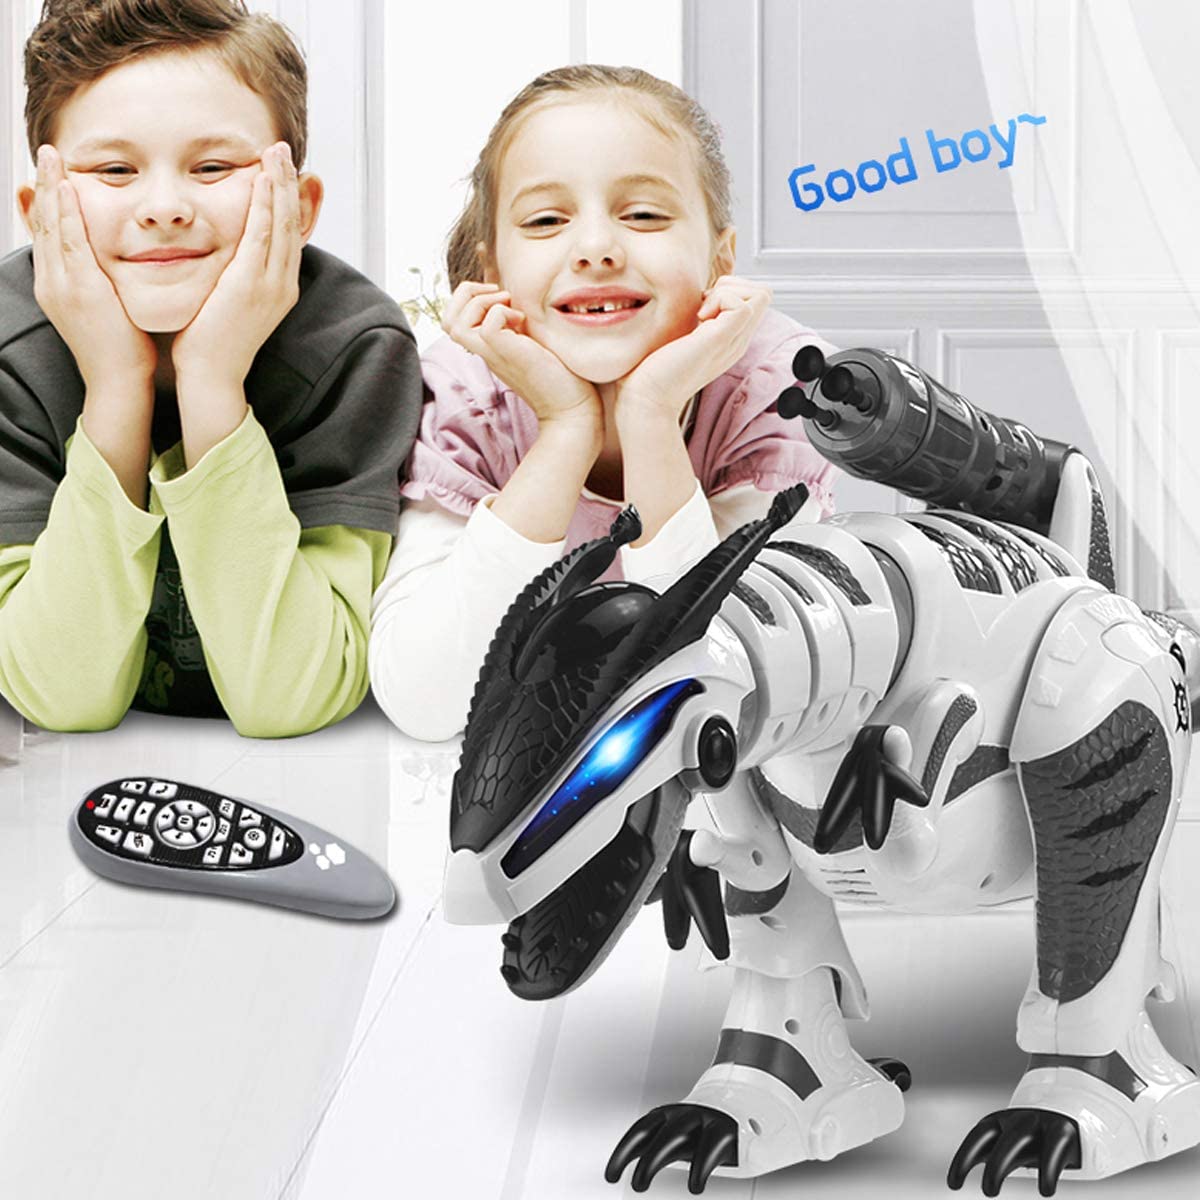 Fistone RC Robot Dinosaur Intelligent Interactive Smart Toy Electronic Remote Controller Robot Walking Dancing Singing with Fight Mode Toys for Kids Boys Girls Age 5 6 7 8 9 10 and Up Year Old - (For 4 piece(s))